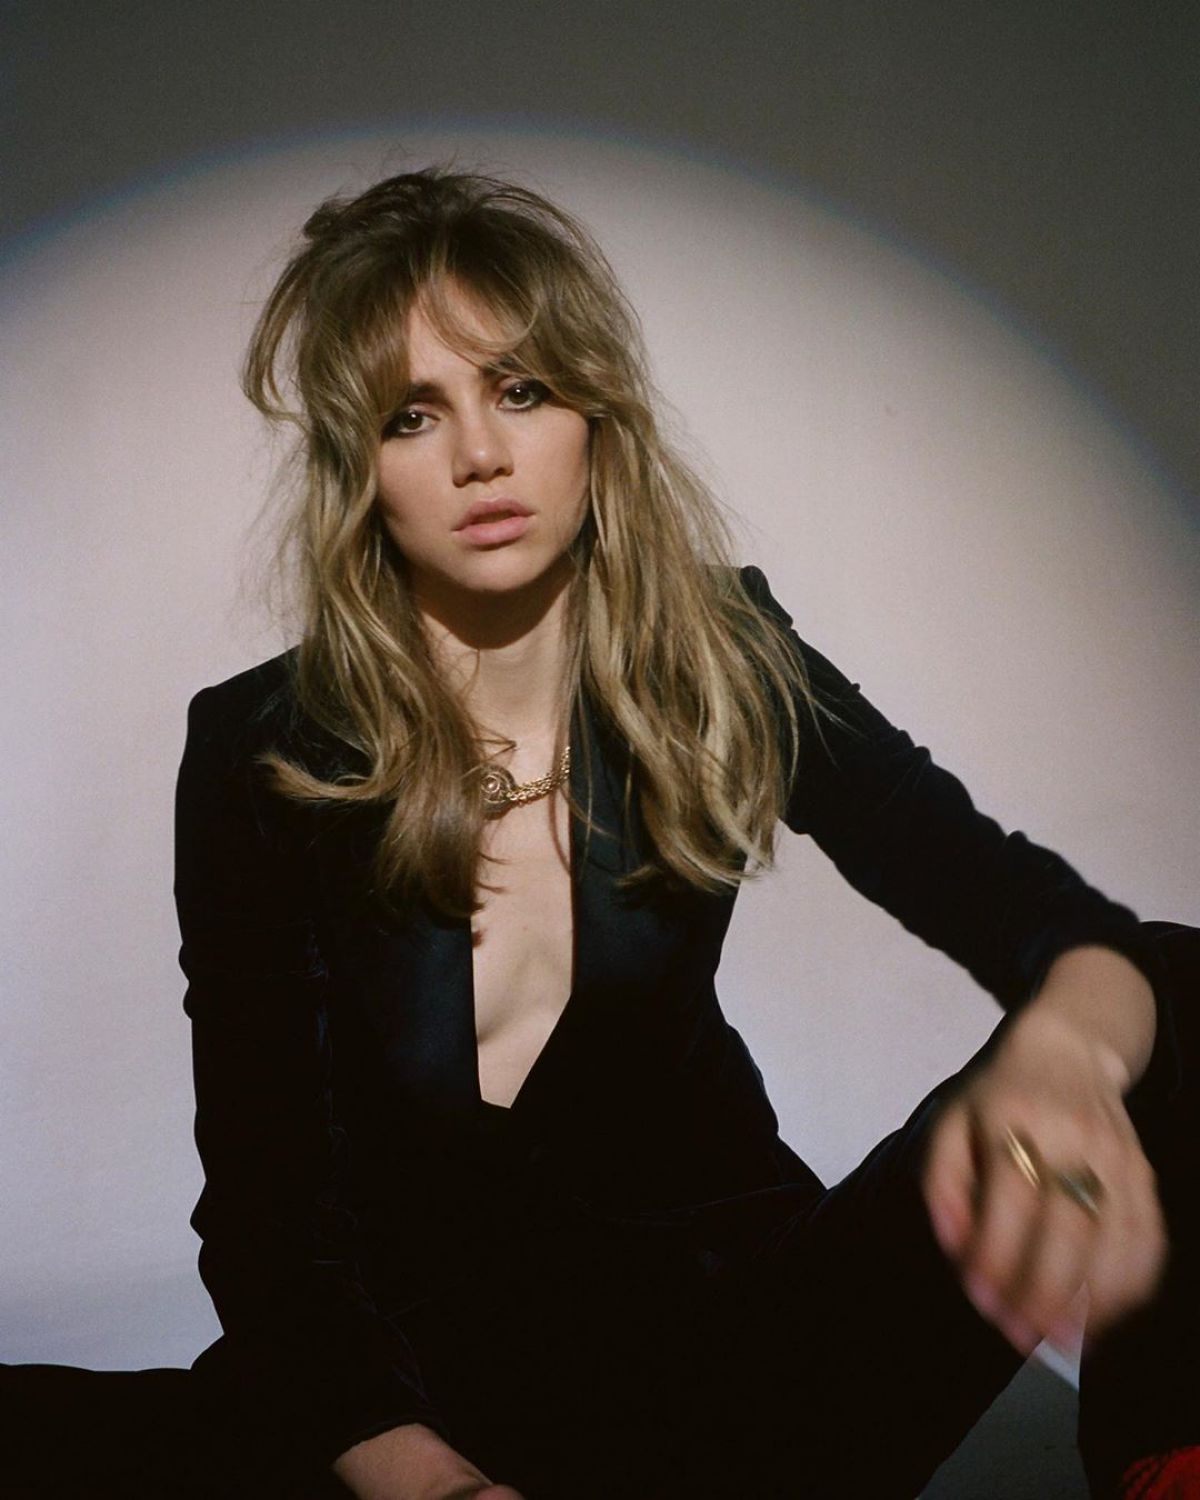 suki-waterhouse-for-coolest-place-in-the-world-august-2019-3.jpg